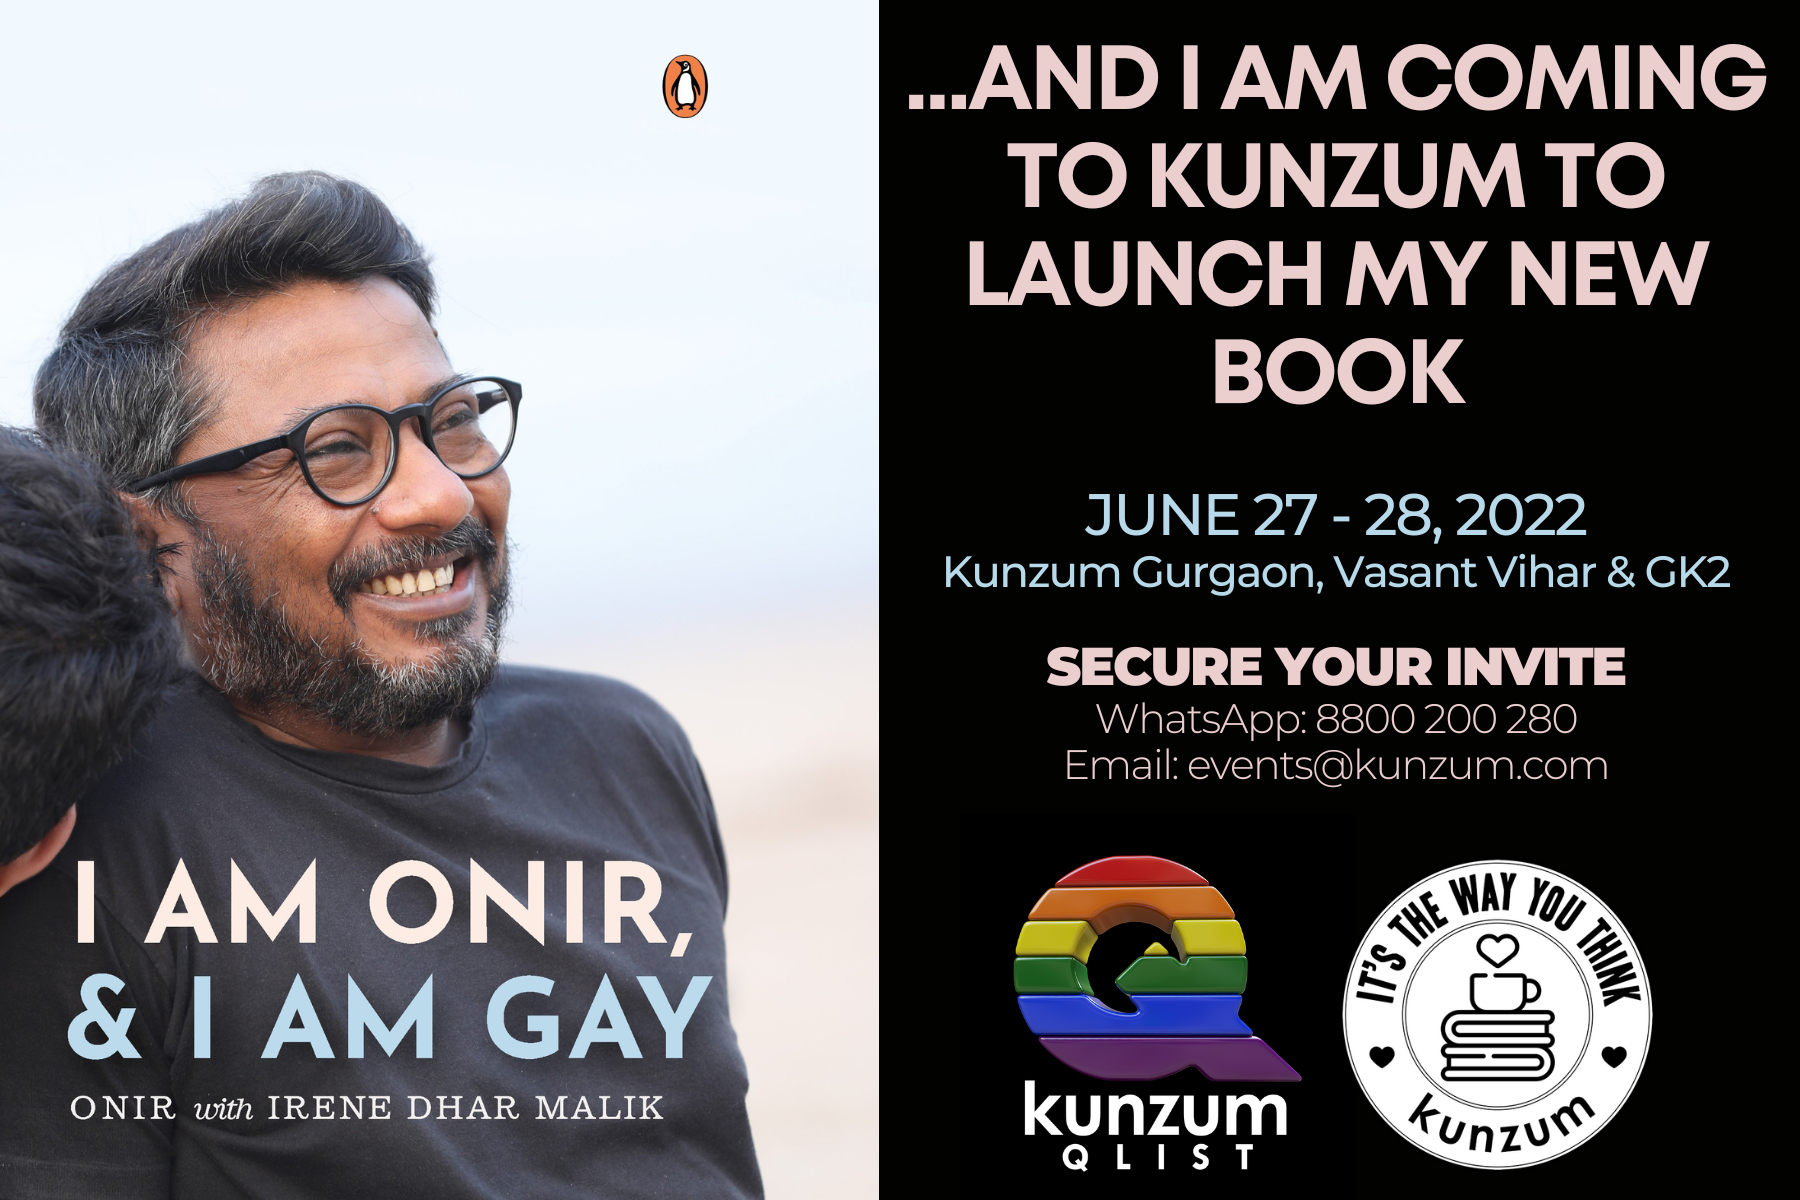 Onir is Coming Out… With a New Book. At Kunzum. June 27-28, 2022